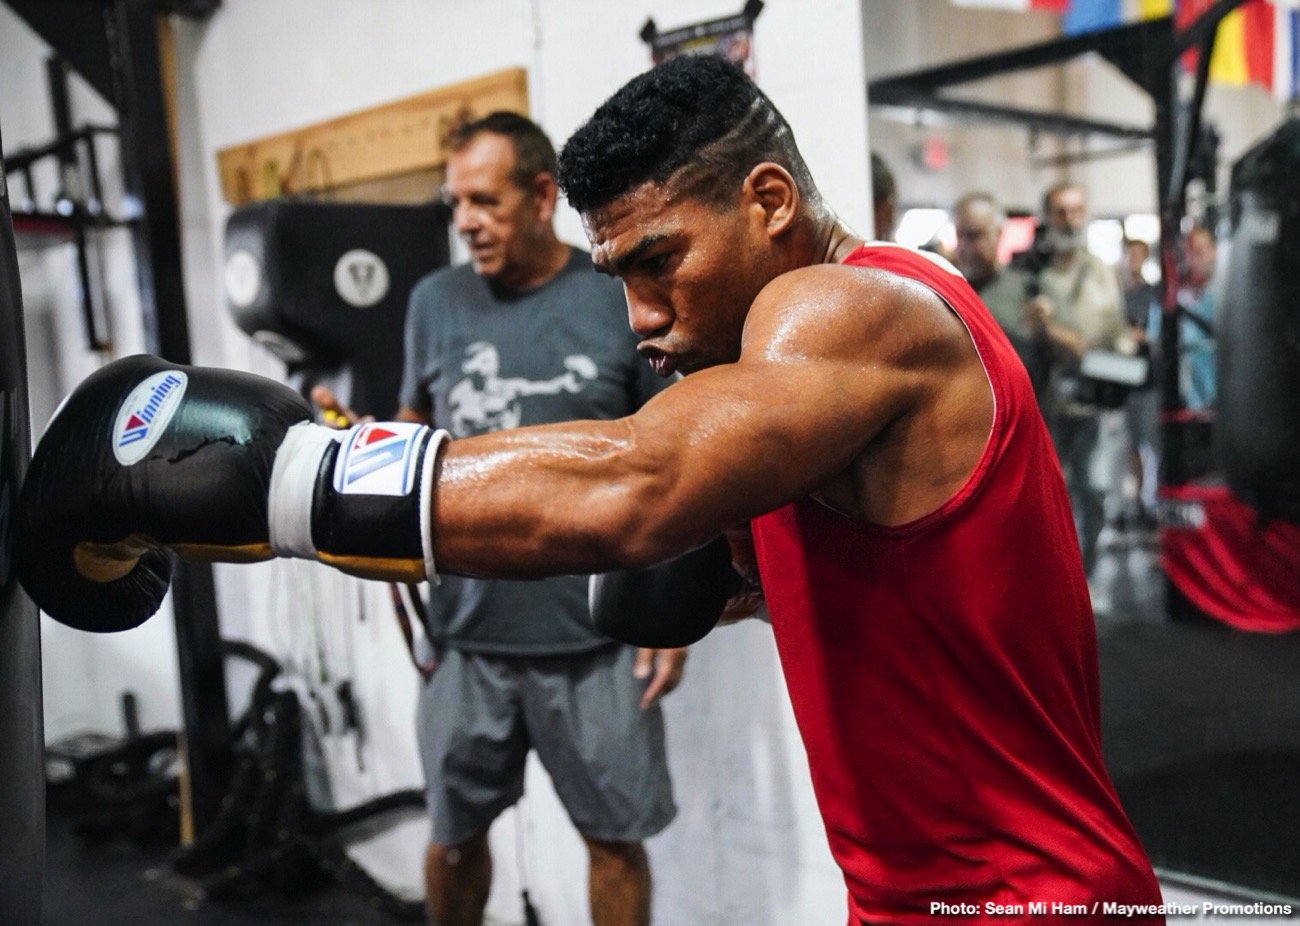 Yuriorkis Gamboa quotes for Gervonta Davis fight on Dec.28 on Showtime